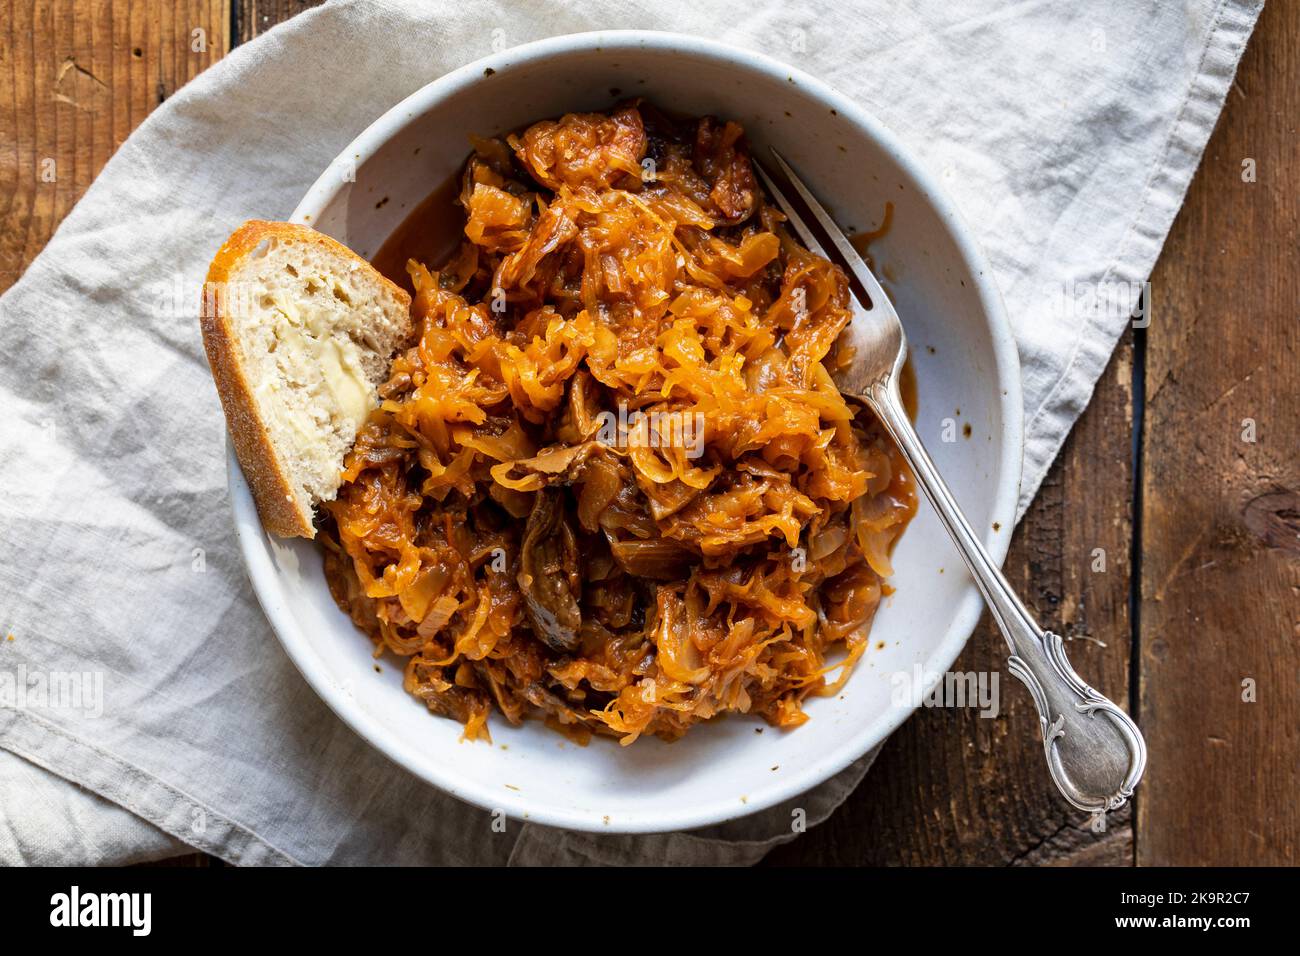 Traditional polish dish of bigos, cabbage with meat, mushrooms and prunes Stock Photo